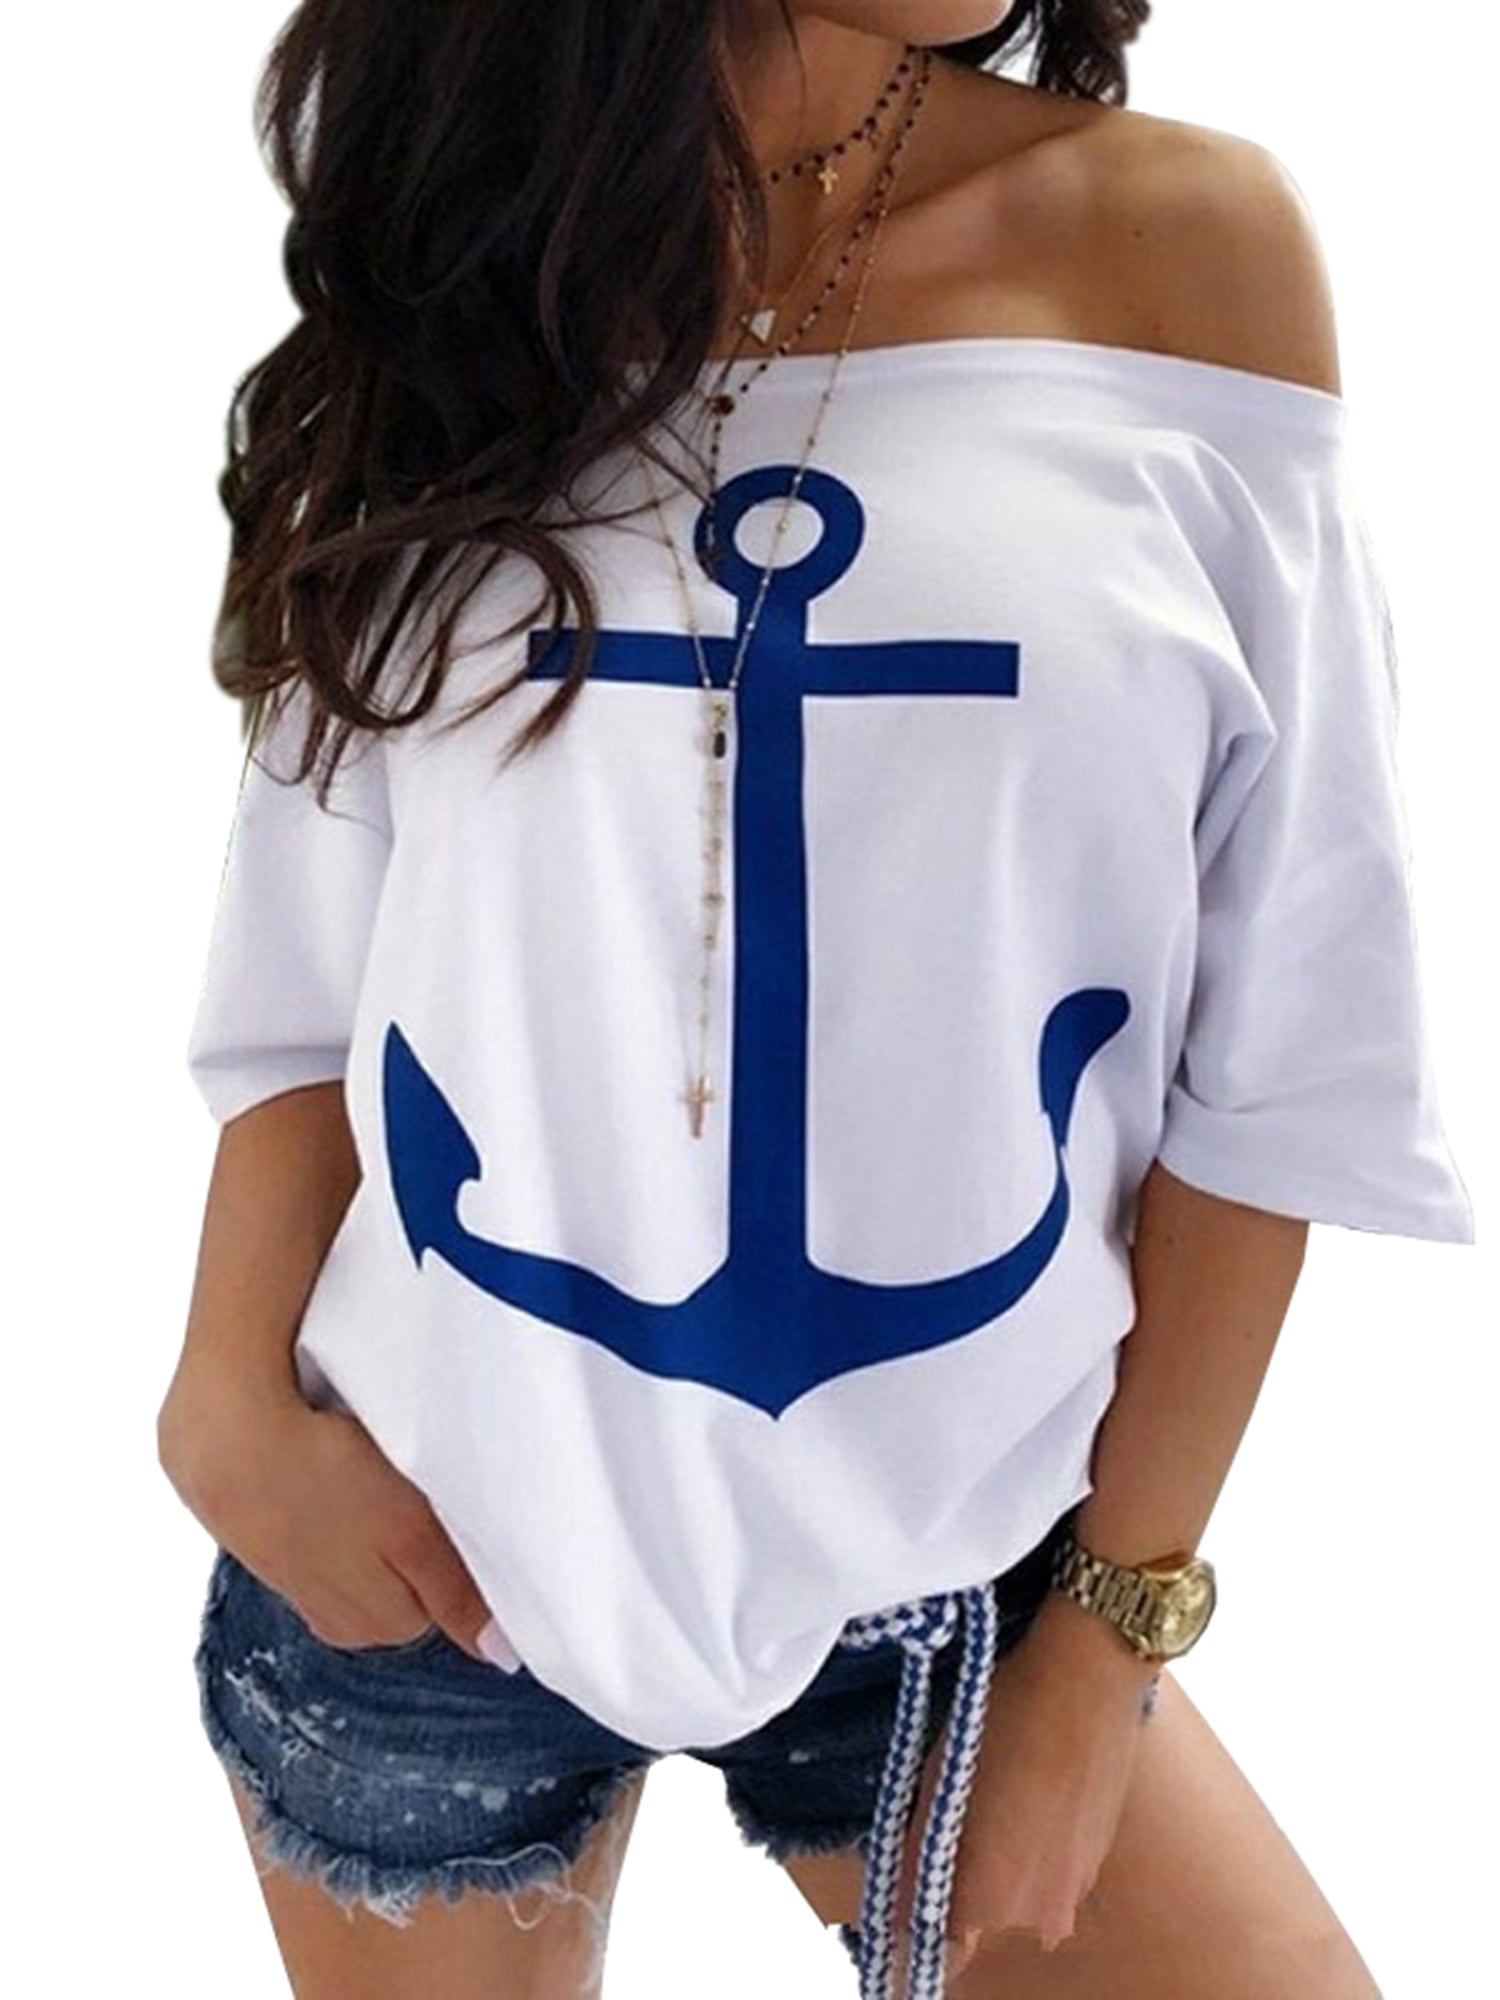 Womens Ladies Letter Graphic Round Neck Summer Casual Tops T-Shirt Blouse Tee Plus Size S-5XL